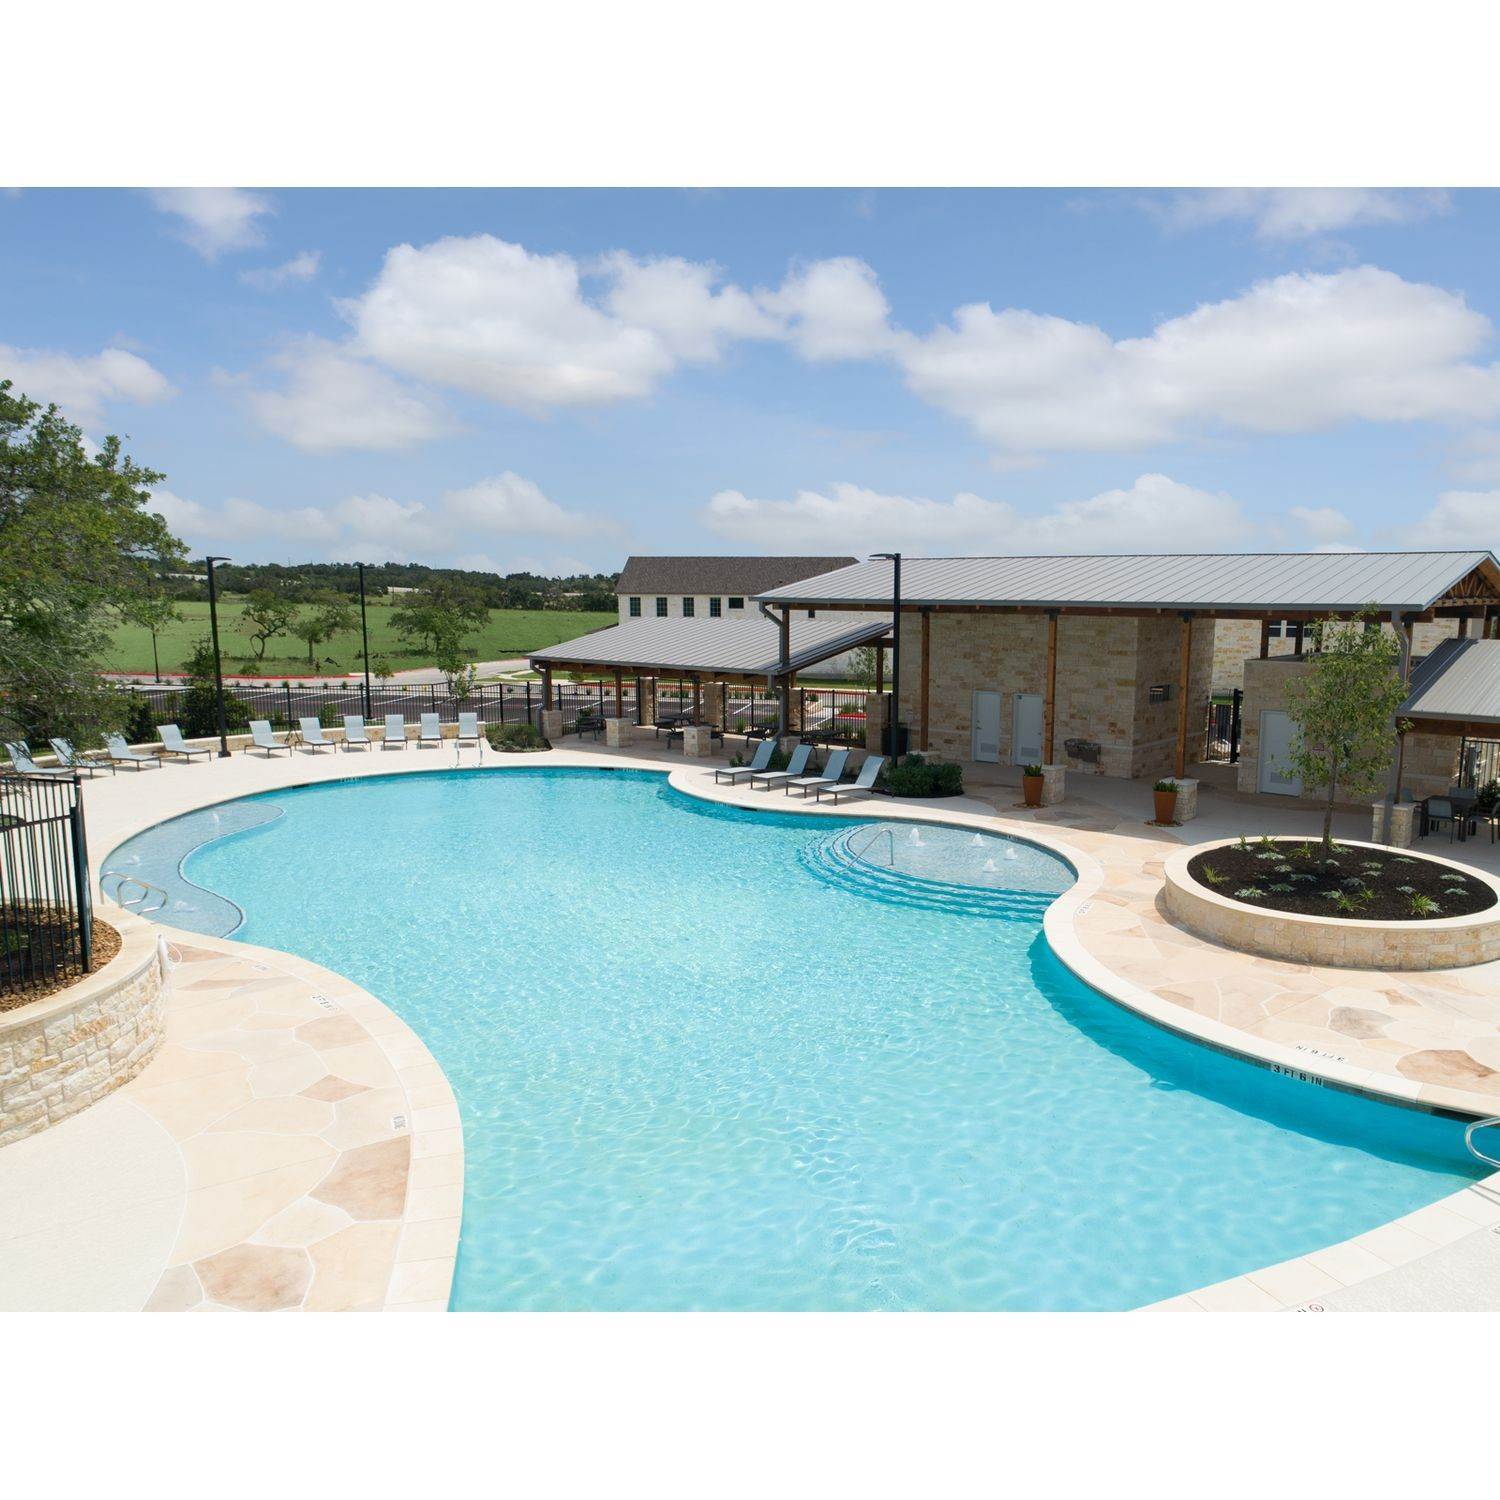 13. 644 Lone Peak Way, Dripping Springs, TX 78620에 Big Sky Ranch - Heritage Collection 건물